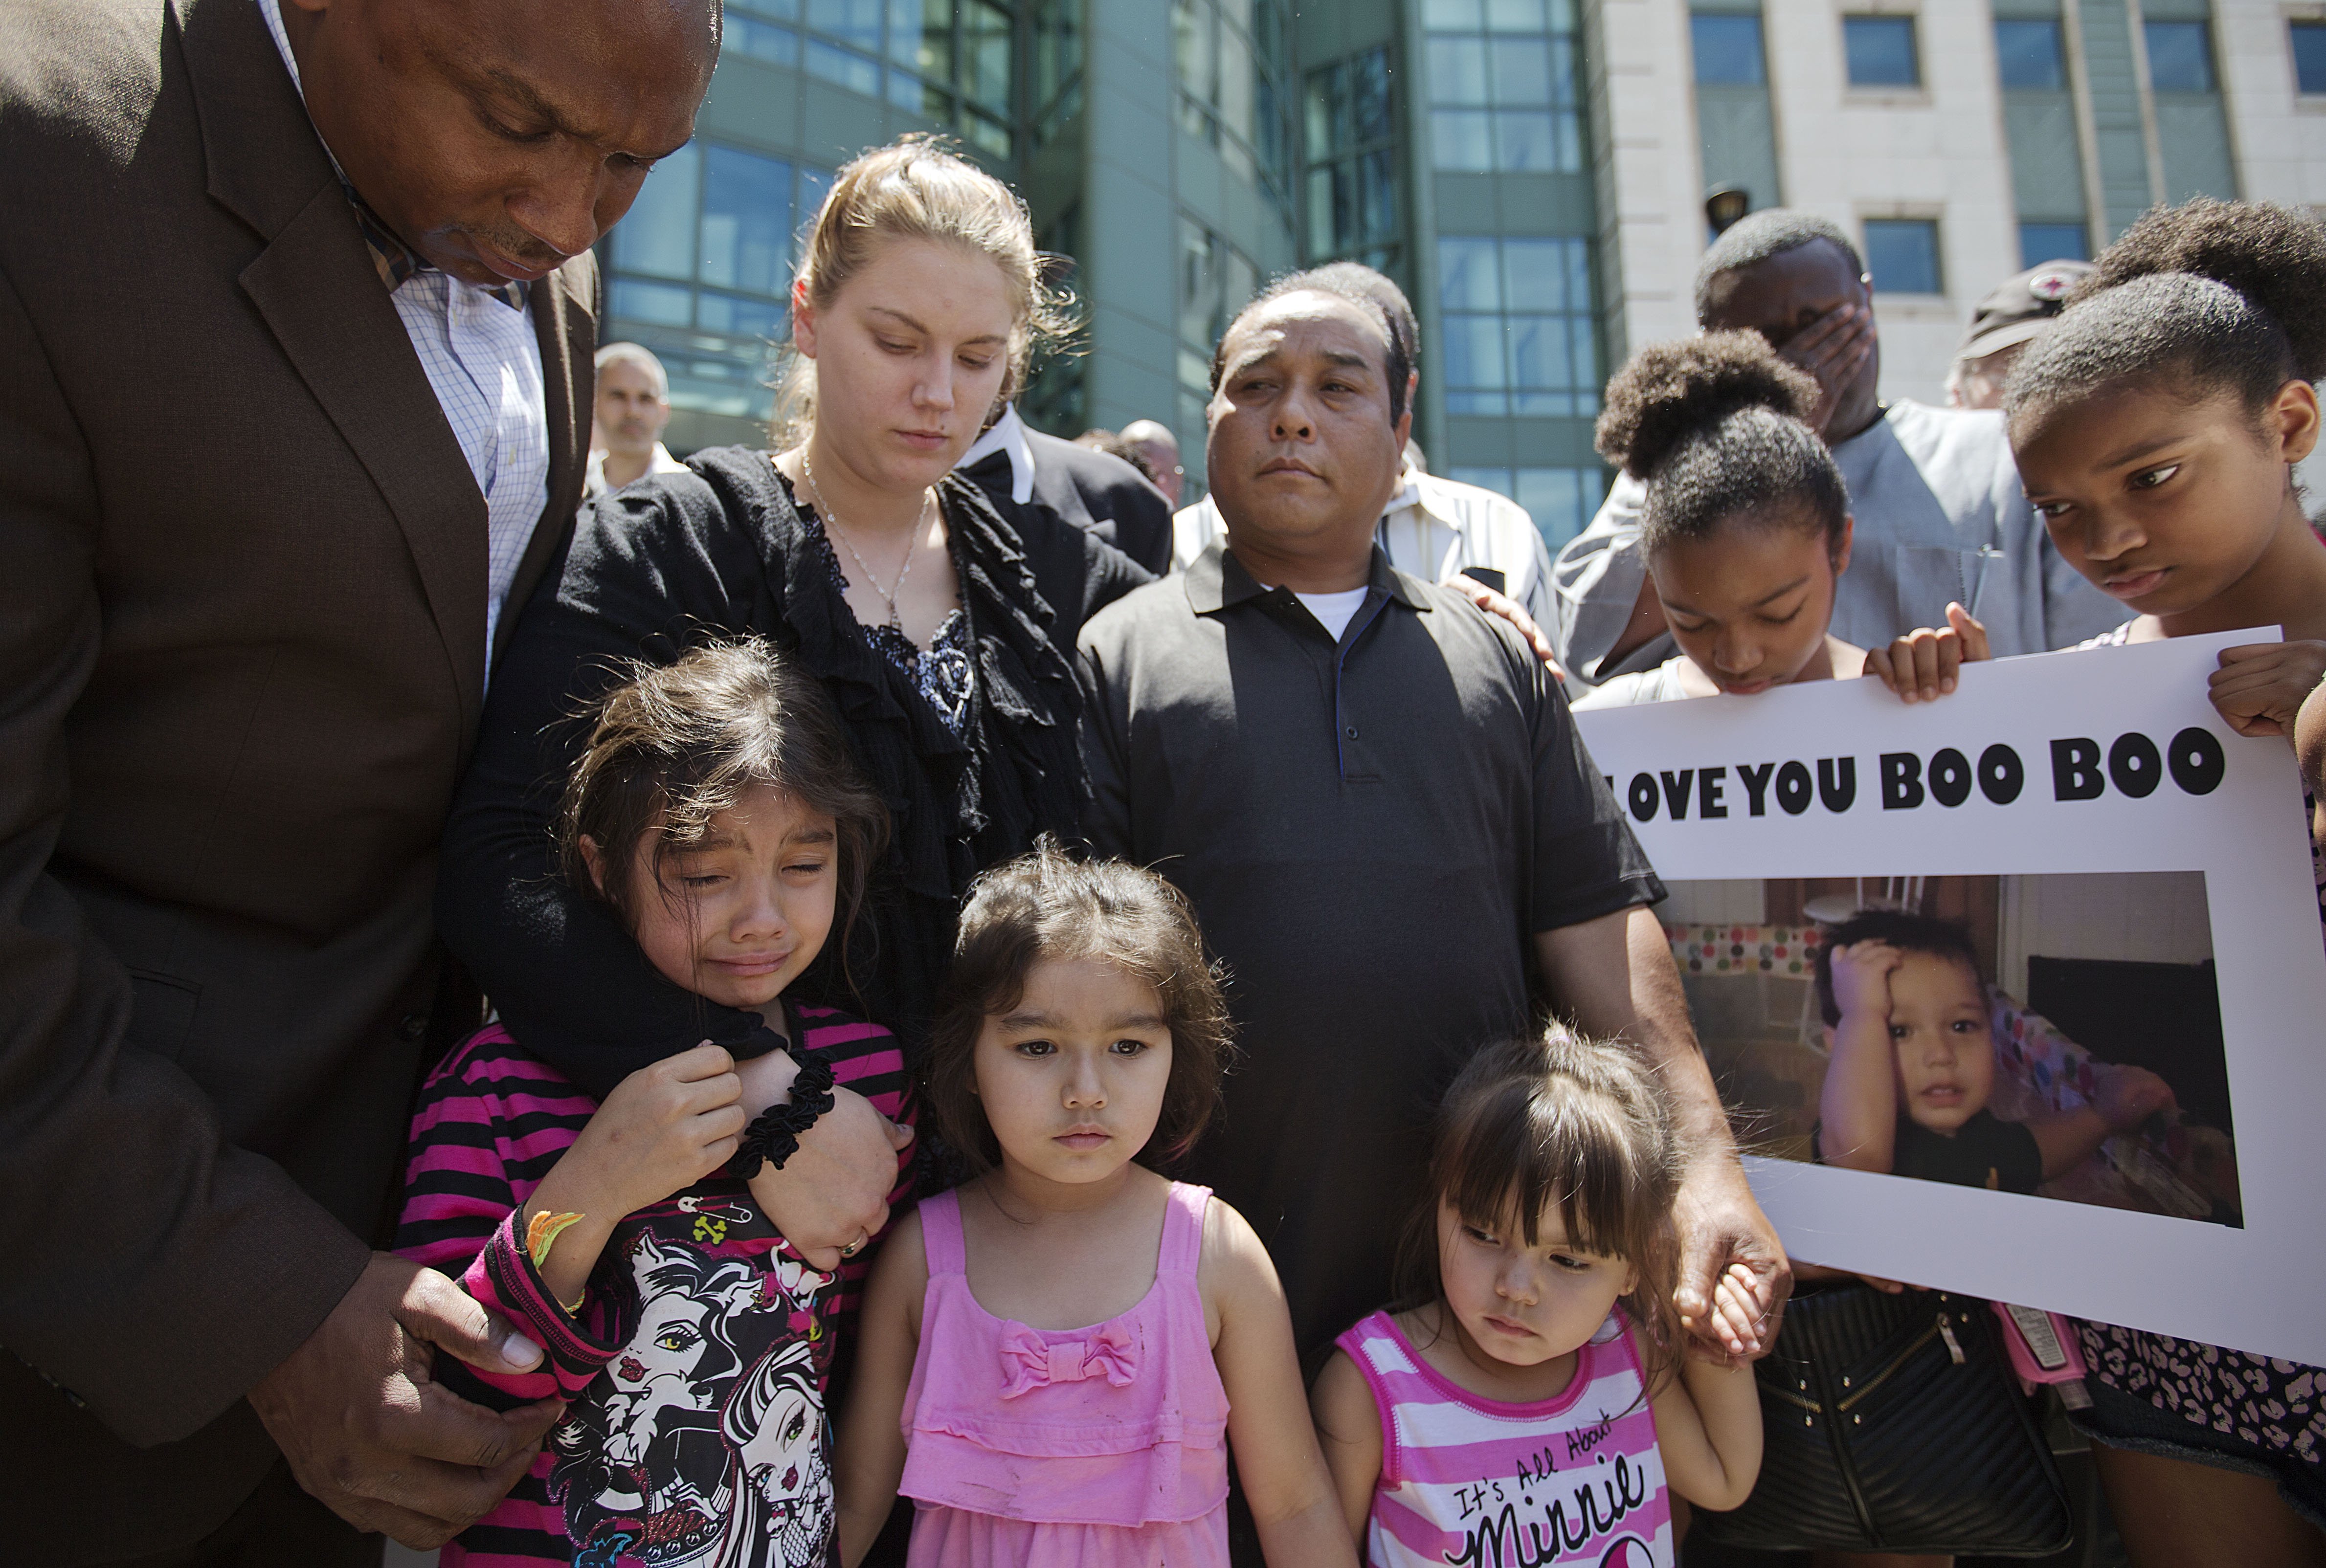 Alecia and Boun Khan Phonesavanh (center), the parents of 19-month-old Bounkham Phonesavanh who was severely burned by a flash grenade during a SWAT drug raid, attend a vigil with their daughters outside Grady Memorial Hospital where he is undergoing treatment, on June 2, 2014, in Atlanta. (David Goldman—AP)